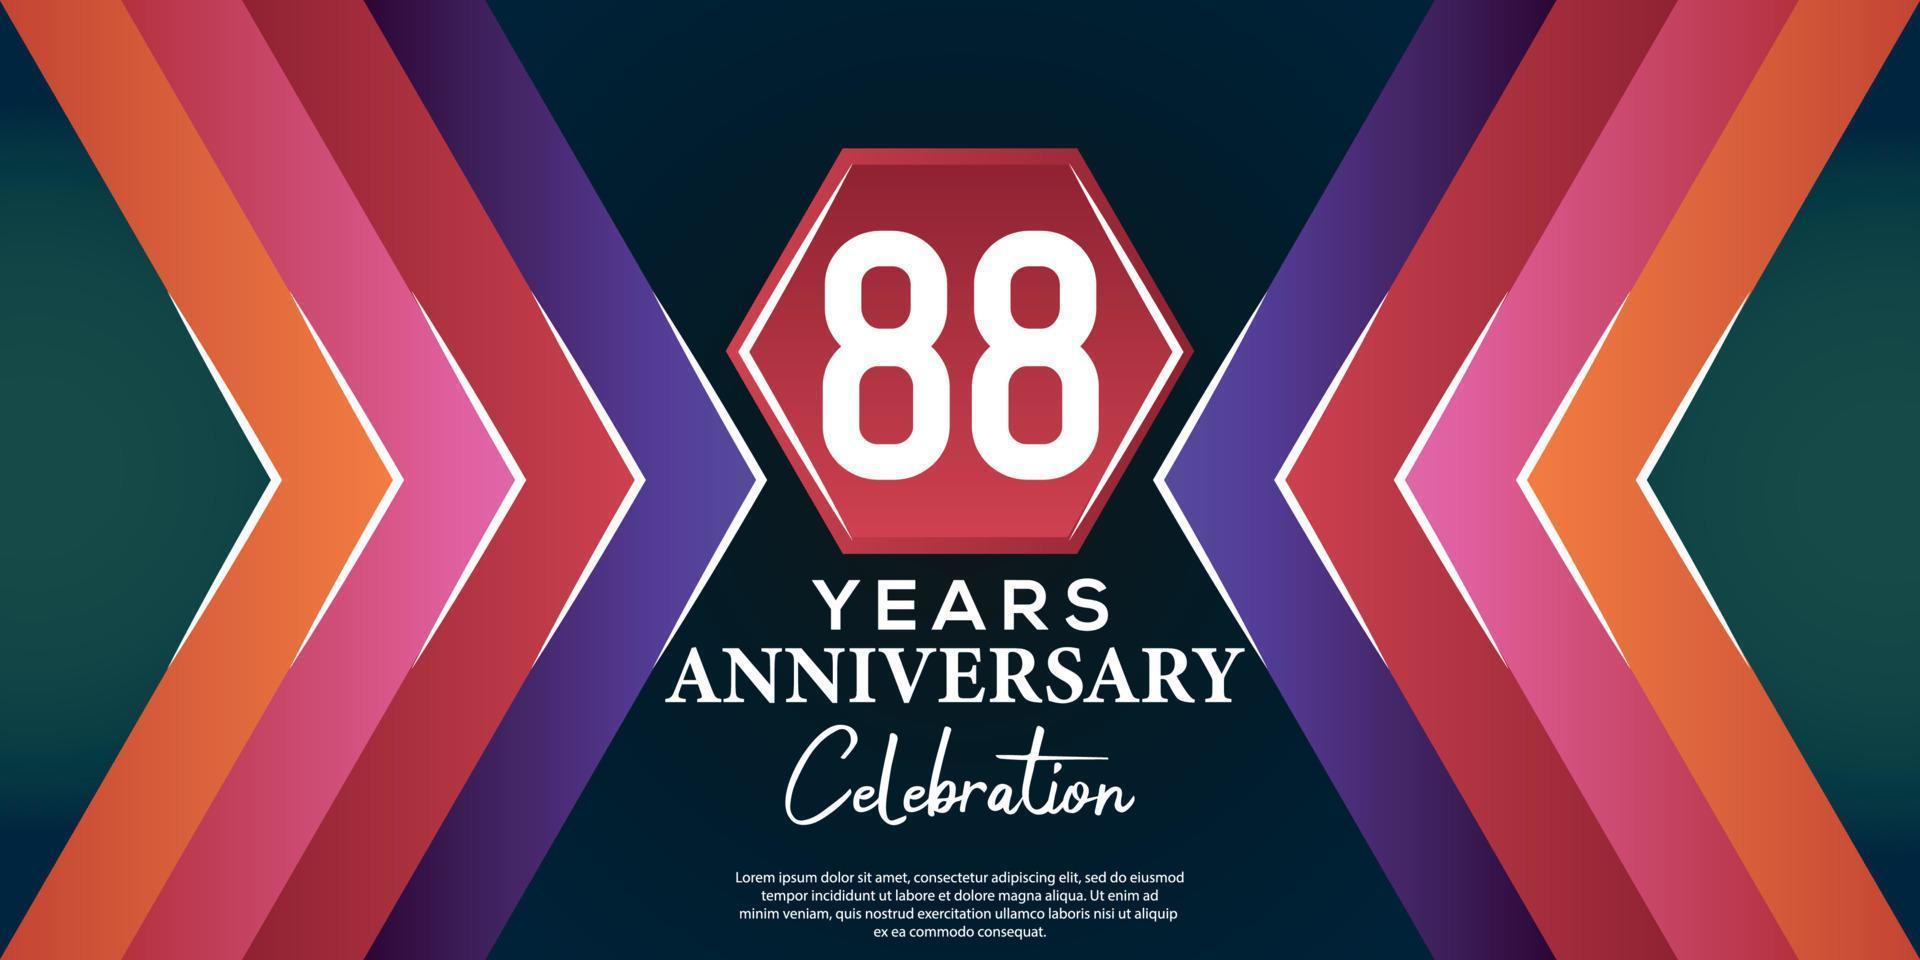 88 year anniversary celebration design with luxury abstract color style on luxury black backgroun vector